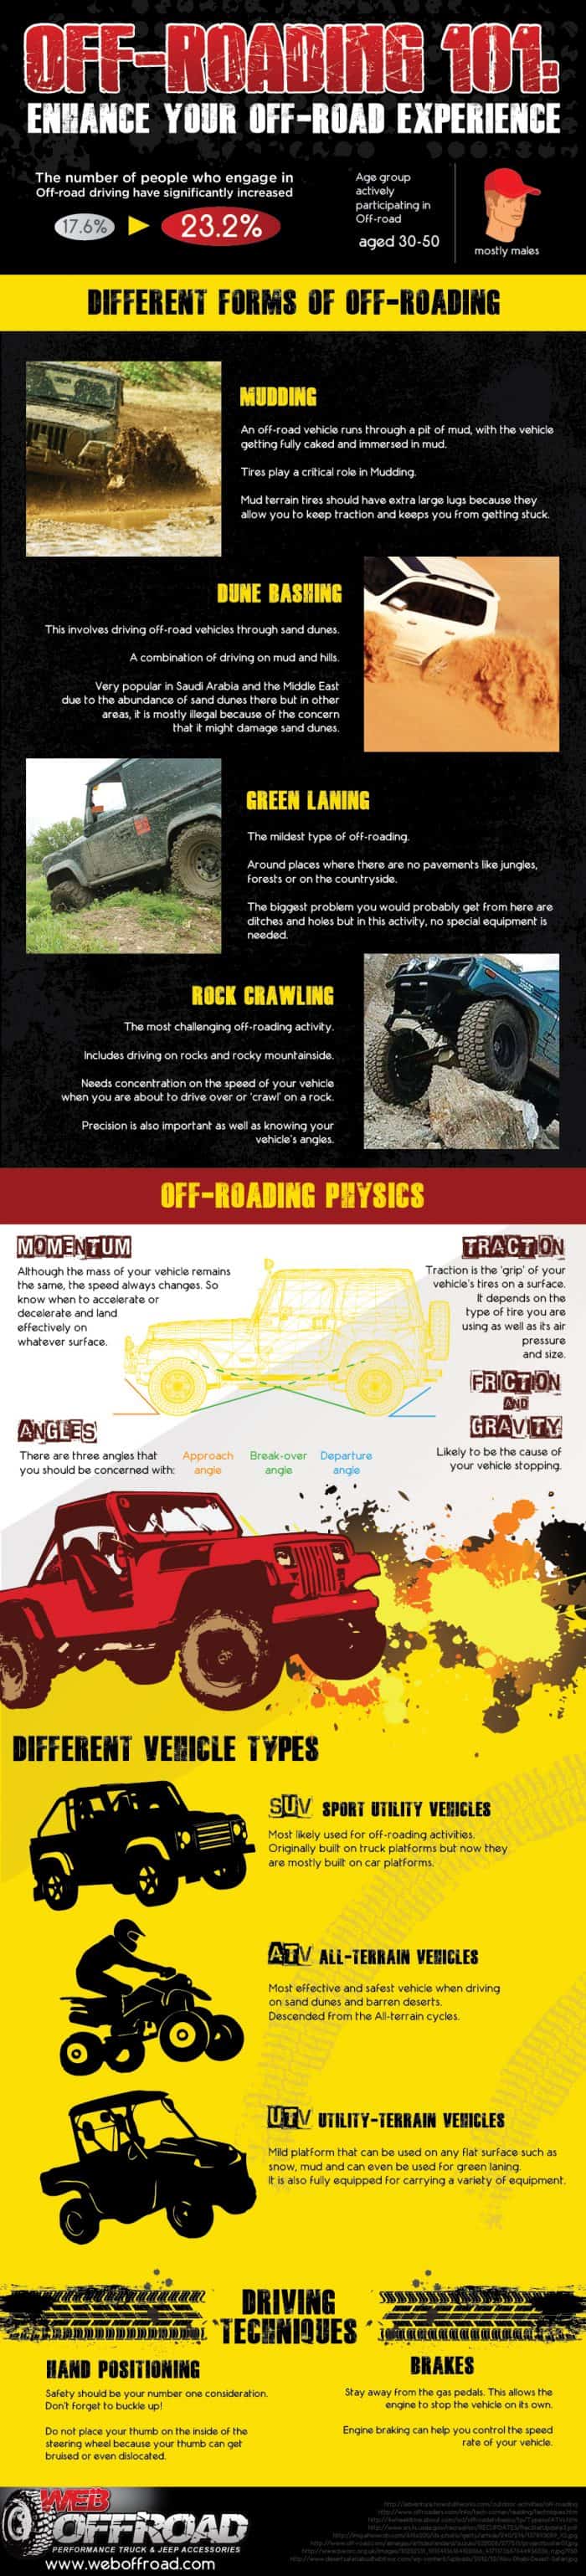 Off-Roading Infographic